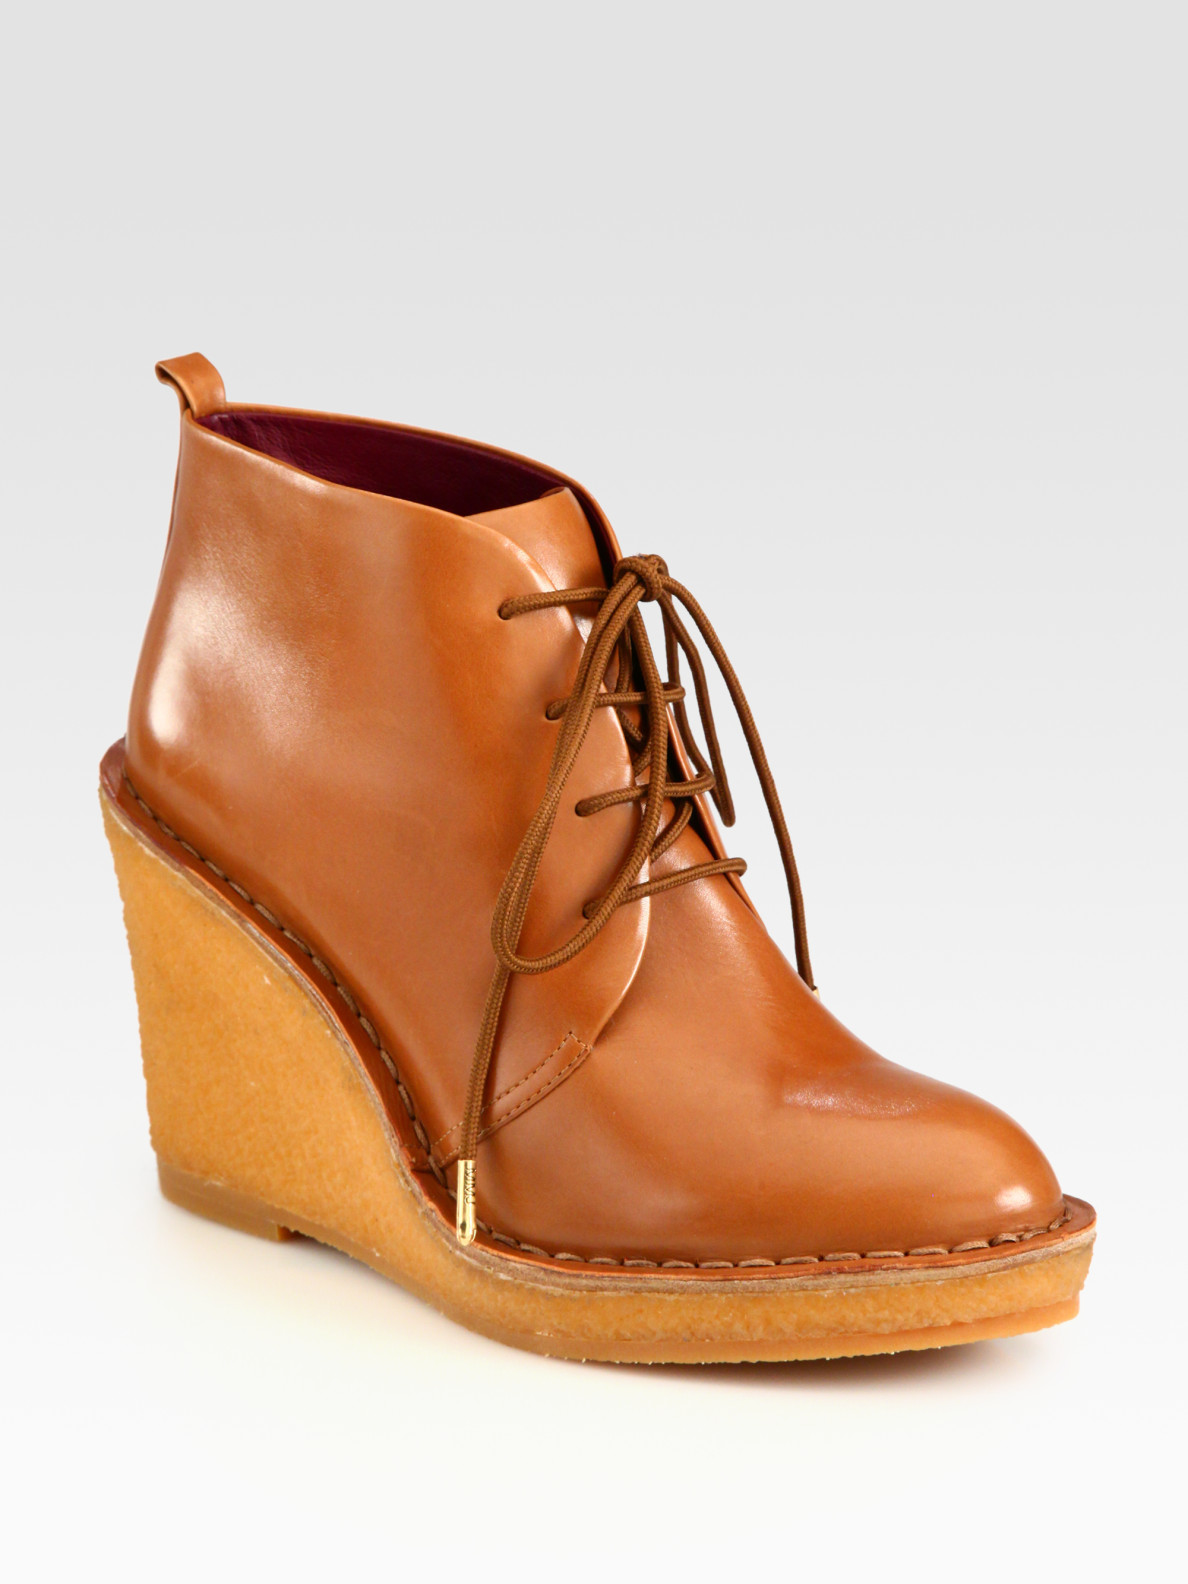 Marc By Marc Jacobs Leather Laceup Wedge Ankle Boots in Camel (Brown) - Lyst